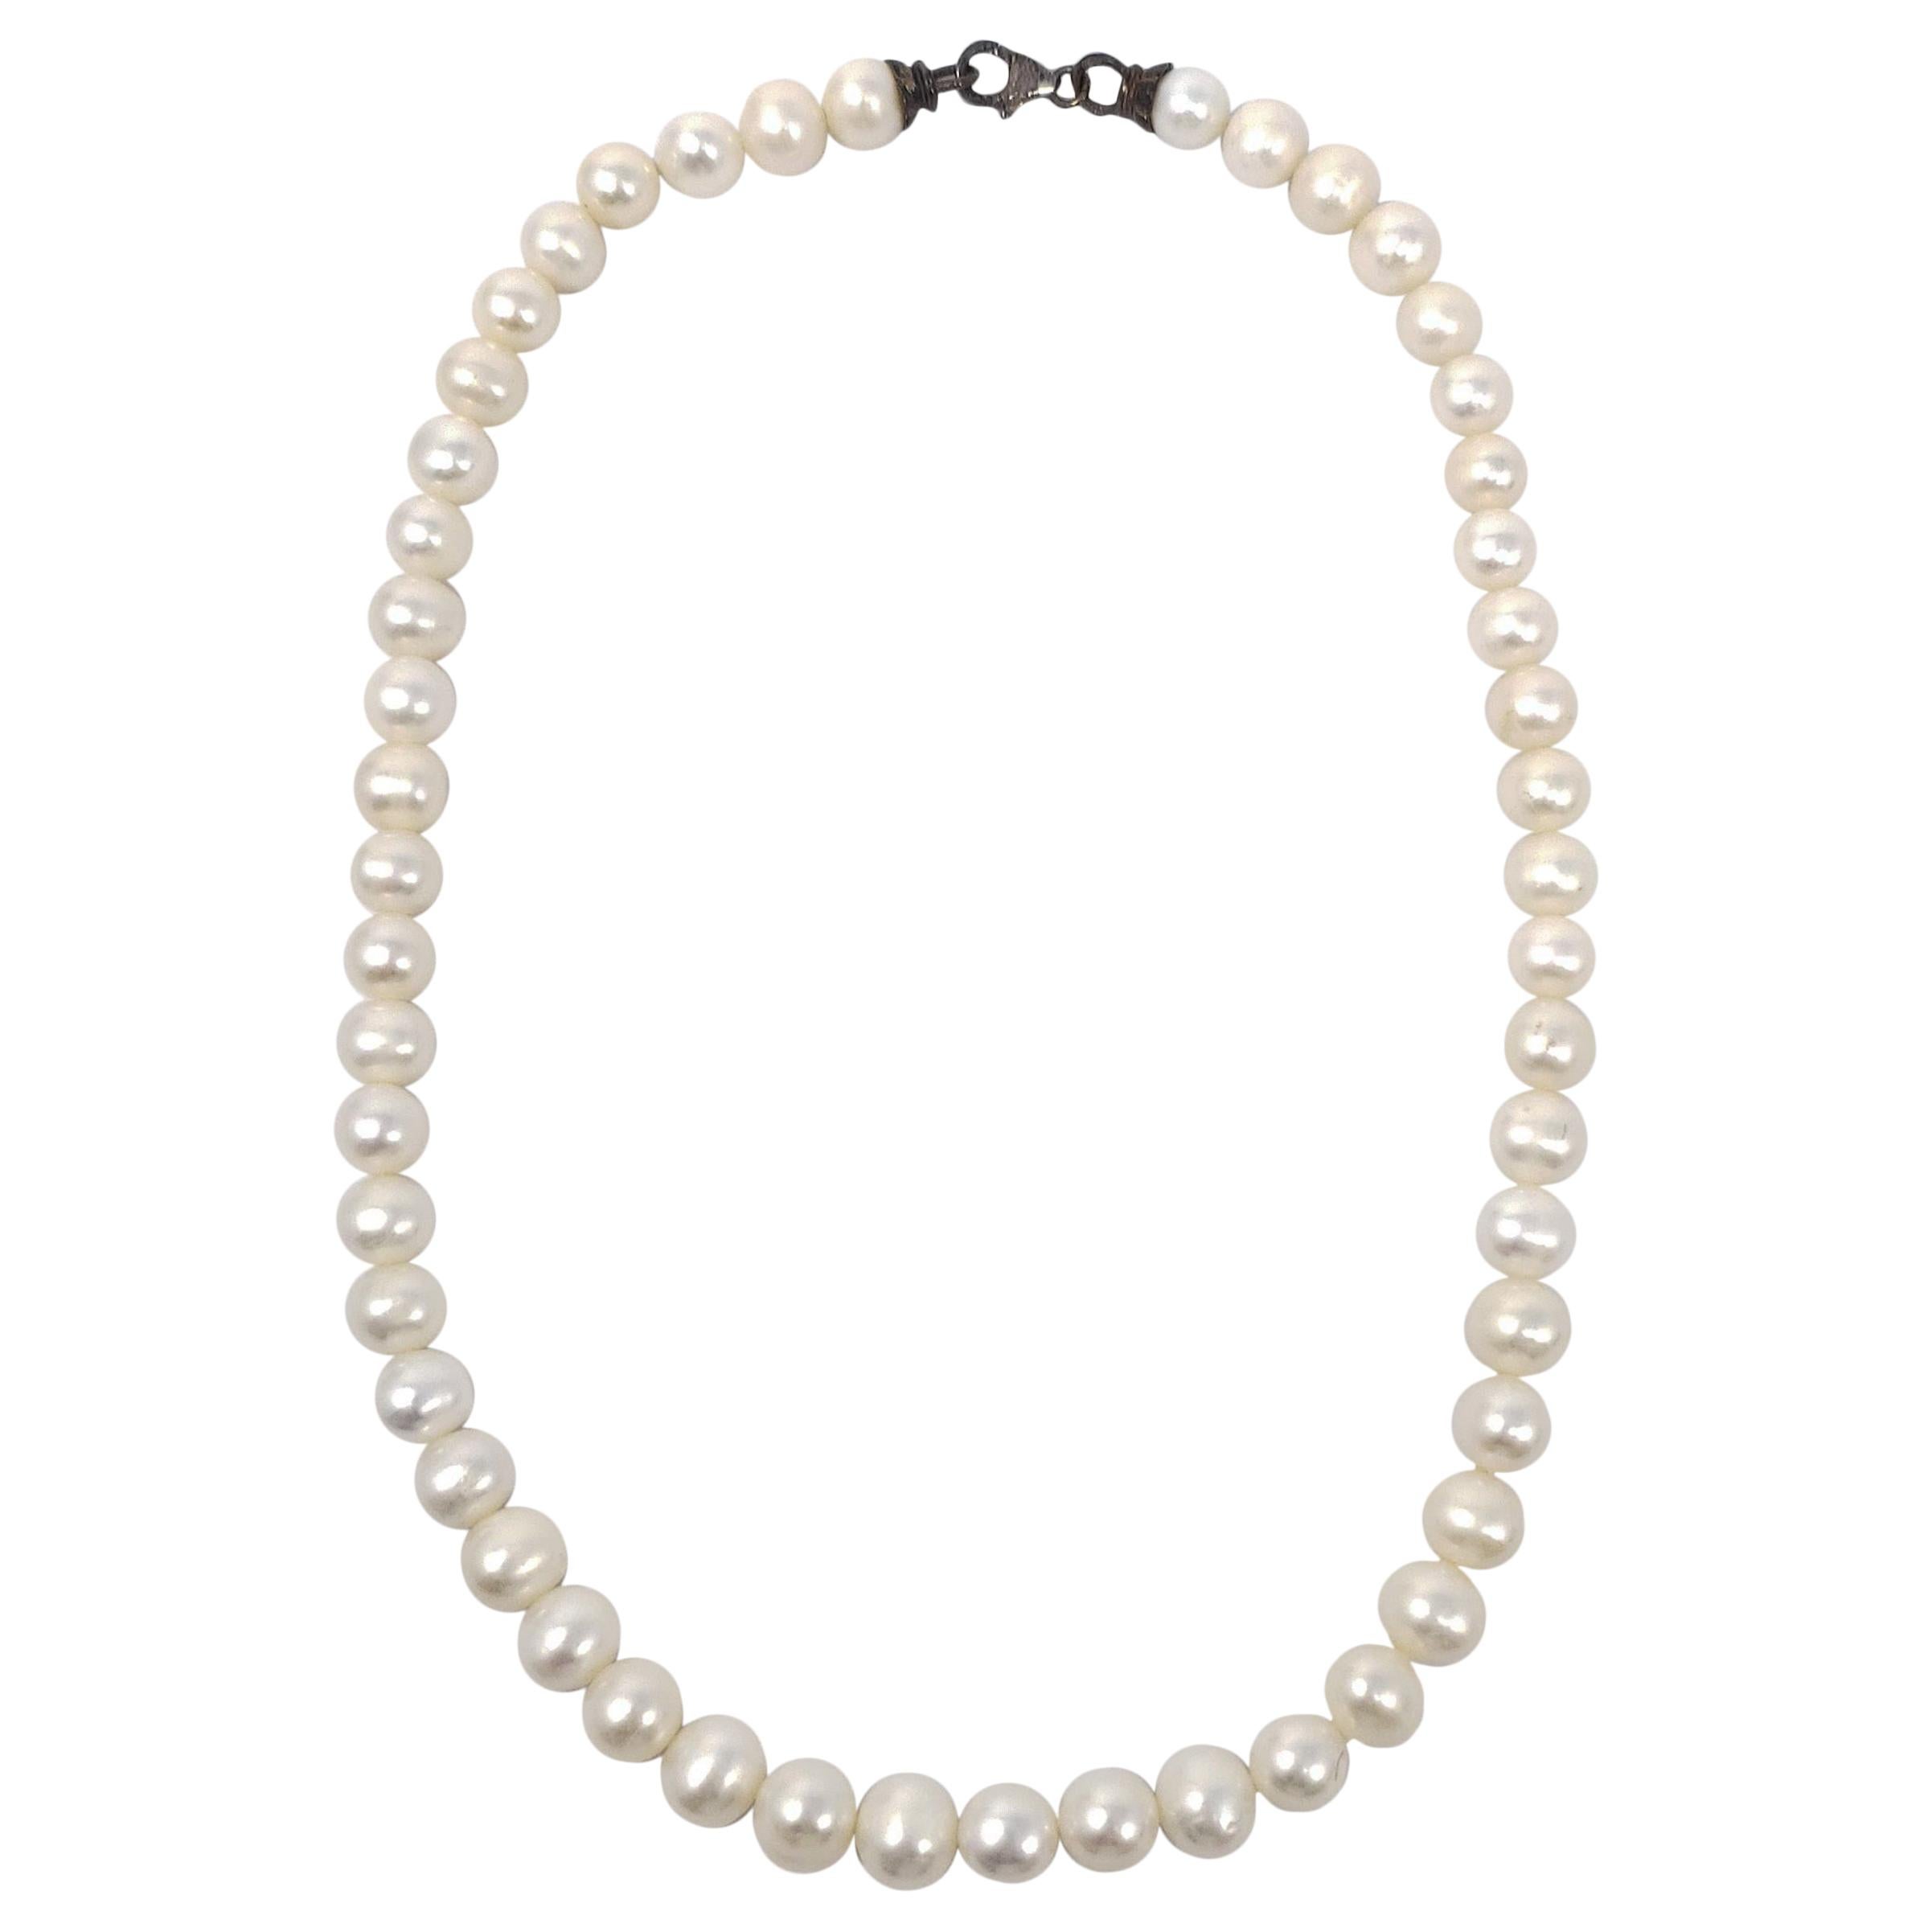 Vintage White Pearl Necklace, Collar Style Length, Mid 1900s, 16 Inches Long